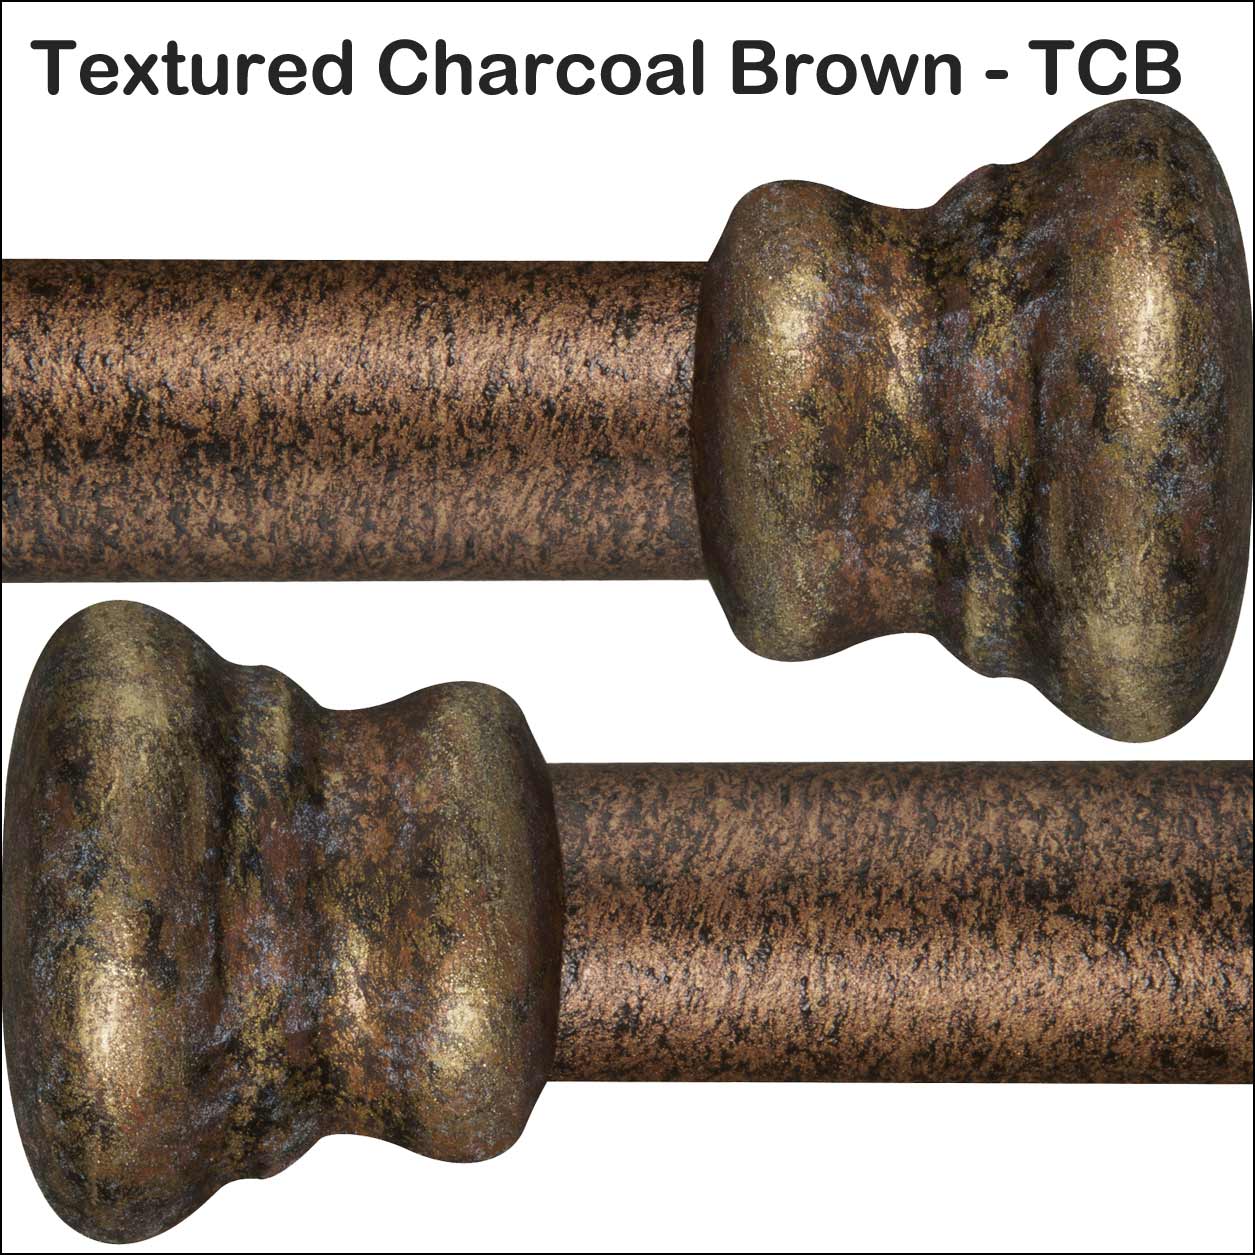 Textured Charcoal Brown TCB Powder Coating Finish Wesley Allen Matriae